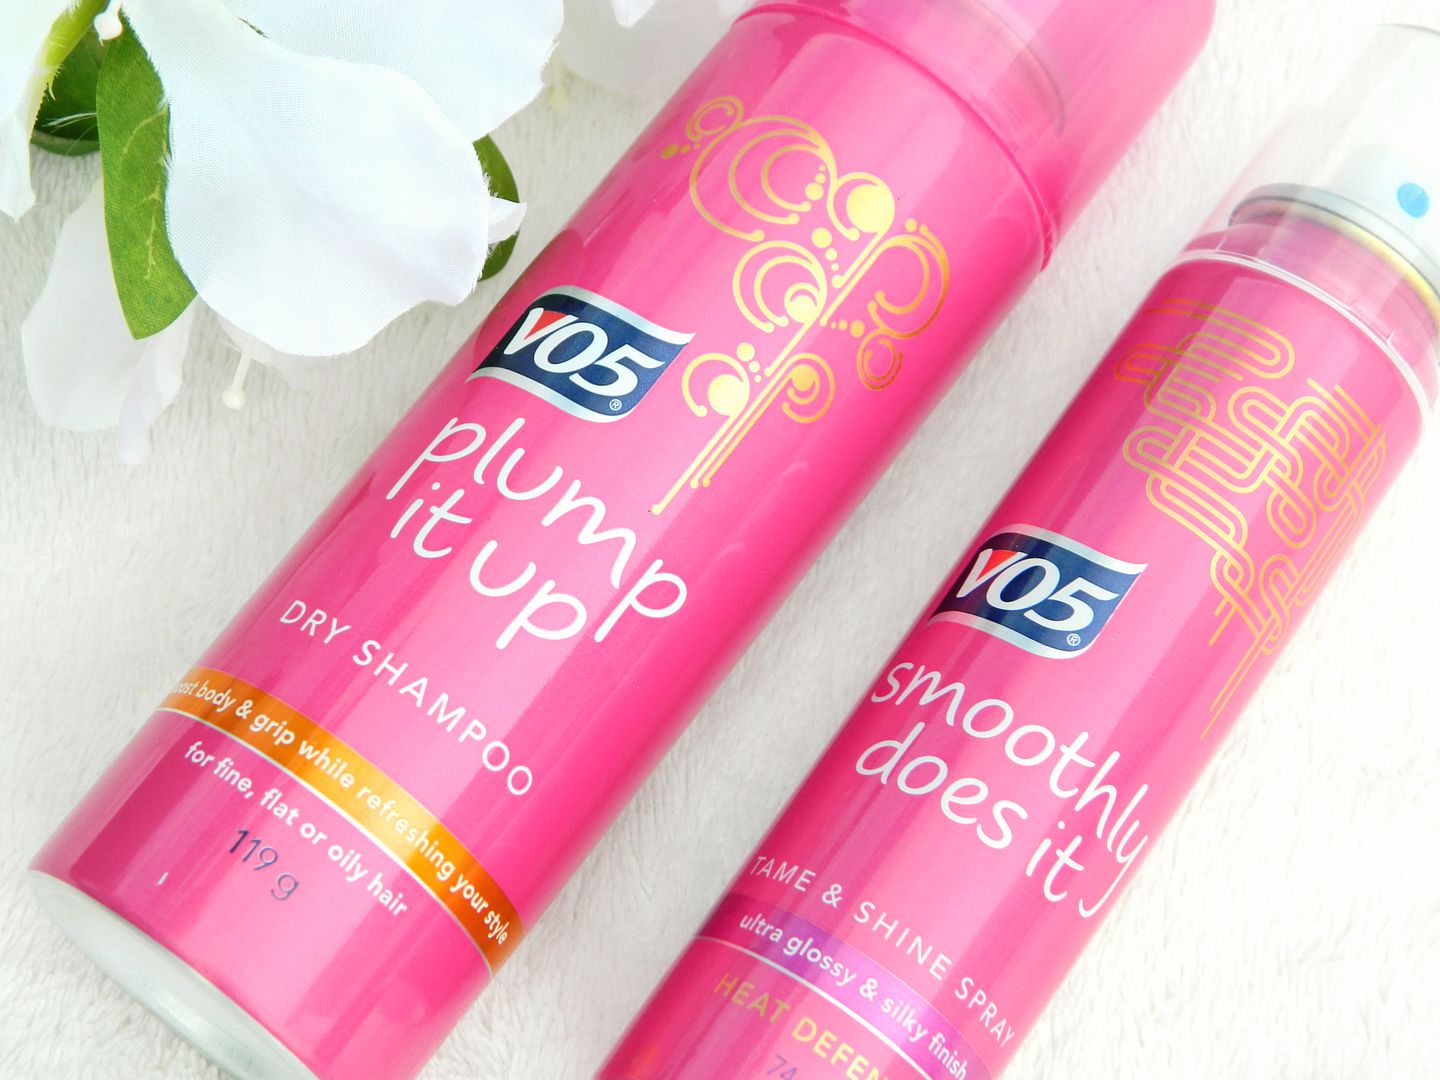 VO5 Hair Care Review Plump It Up Dry Shampoo Smoothly Does It Tame Shine Heat Defence Spray Belle-amie UK Beauty Fashion Lifestyle Blog